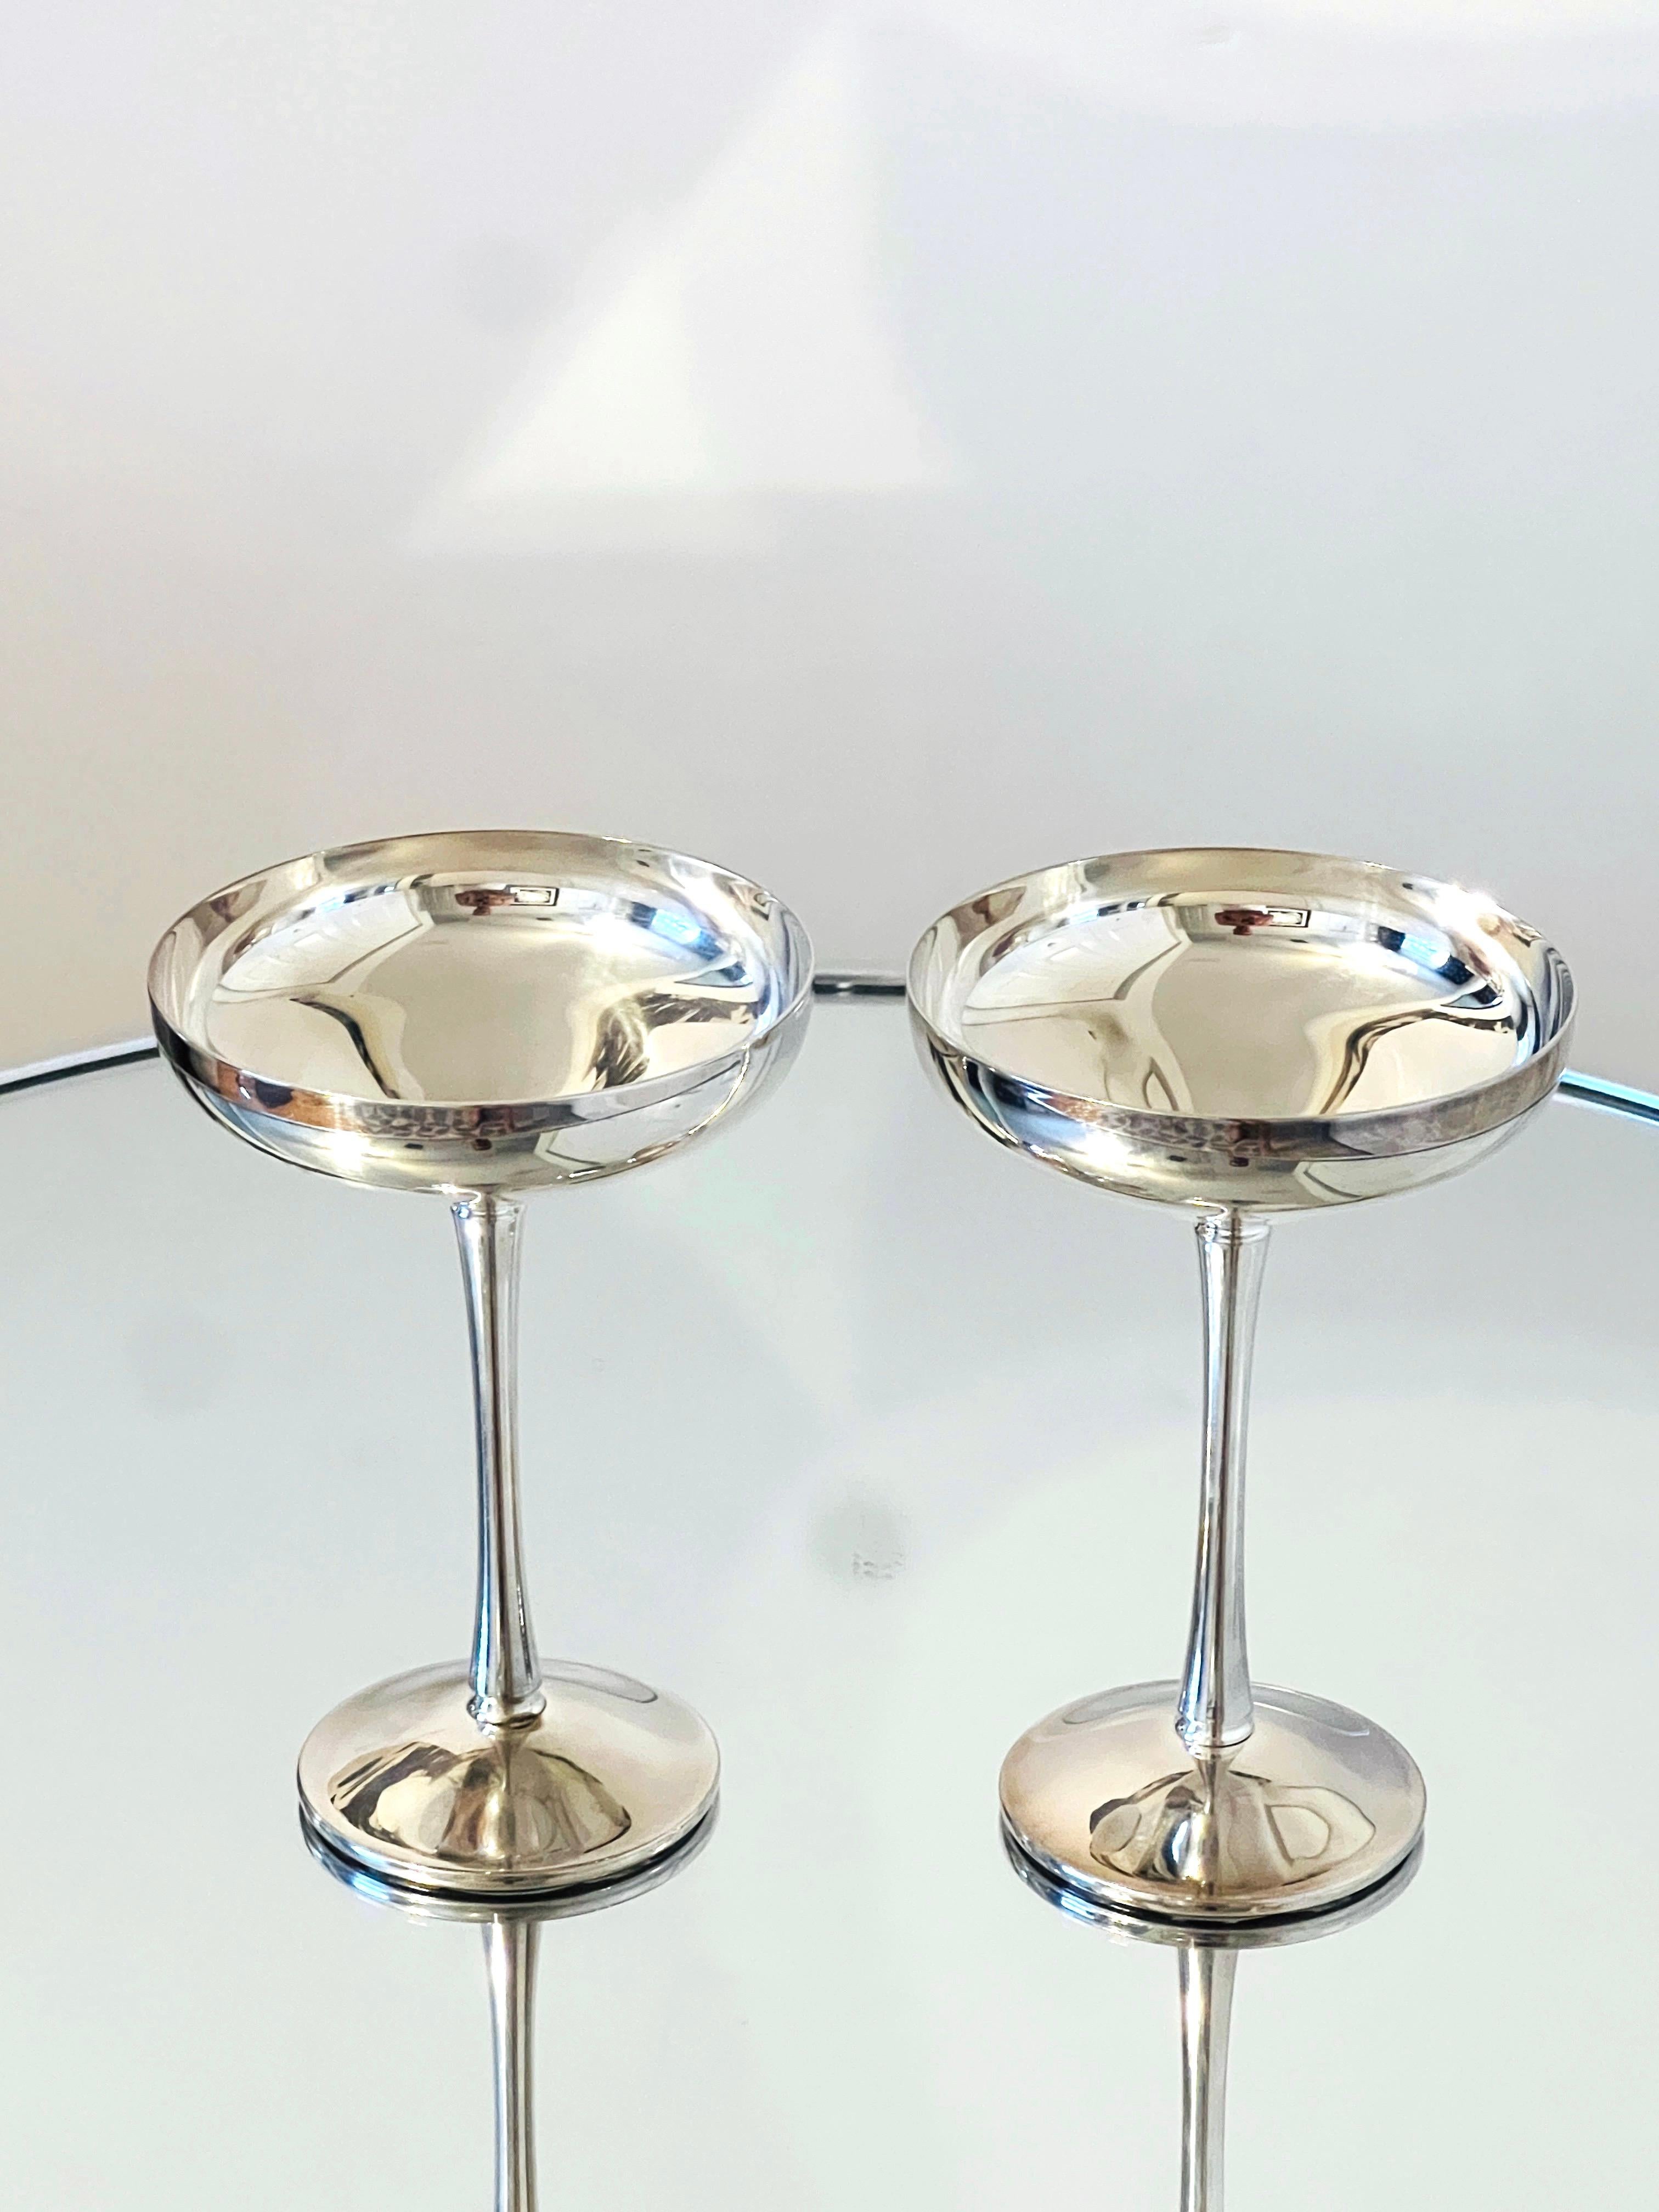 Pair of silver plated champagne coupes or toasting goblets by Kirk-Stieff. Feature elegant rounded saucers with tapered stems, and ring notches along the top and bottom of the stems. The coupes bare the company hallmark on the underside of each cup.